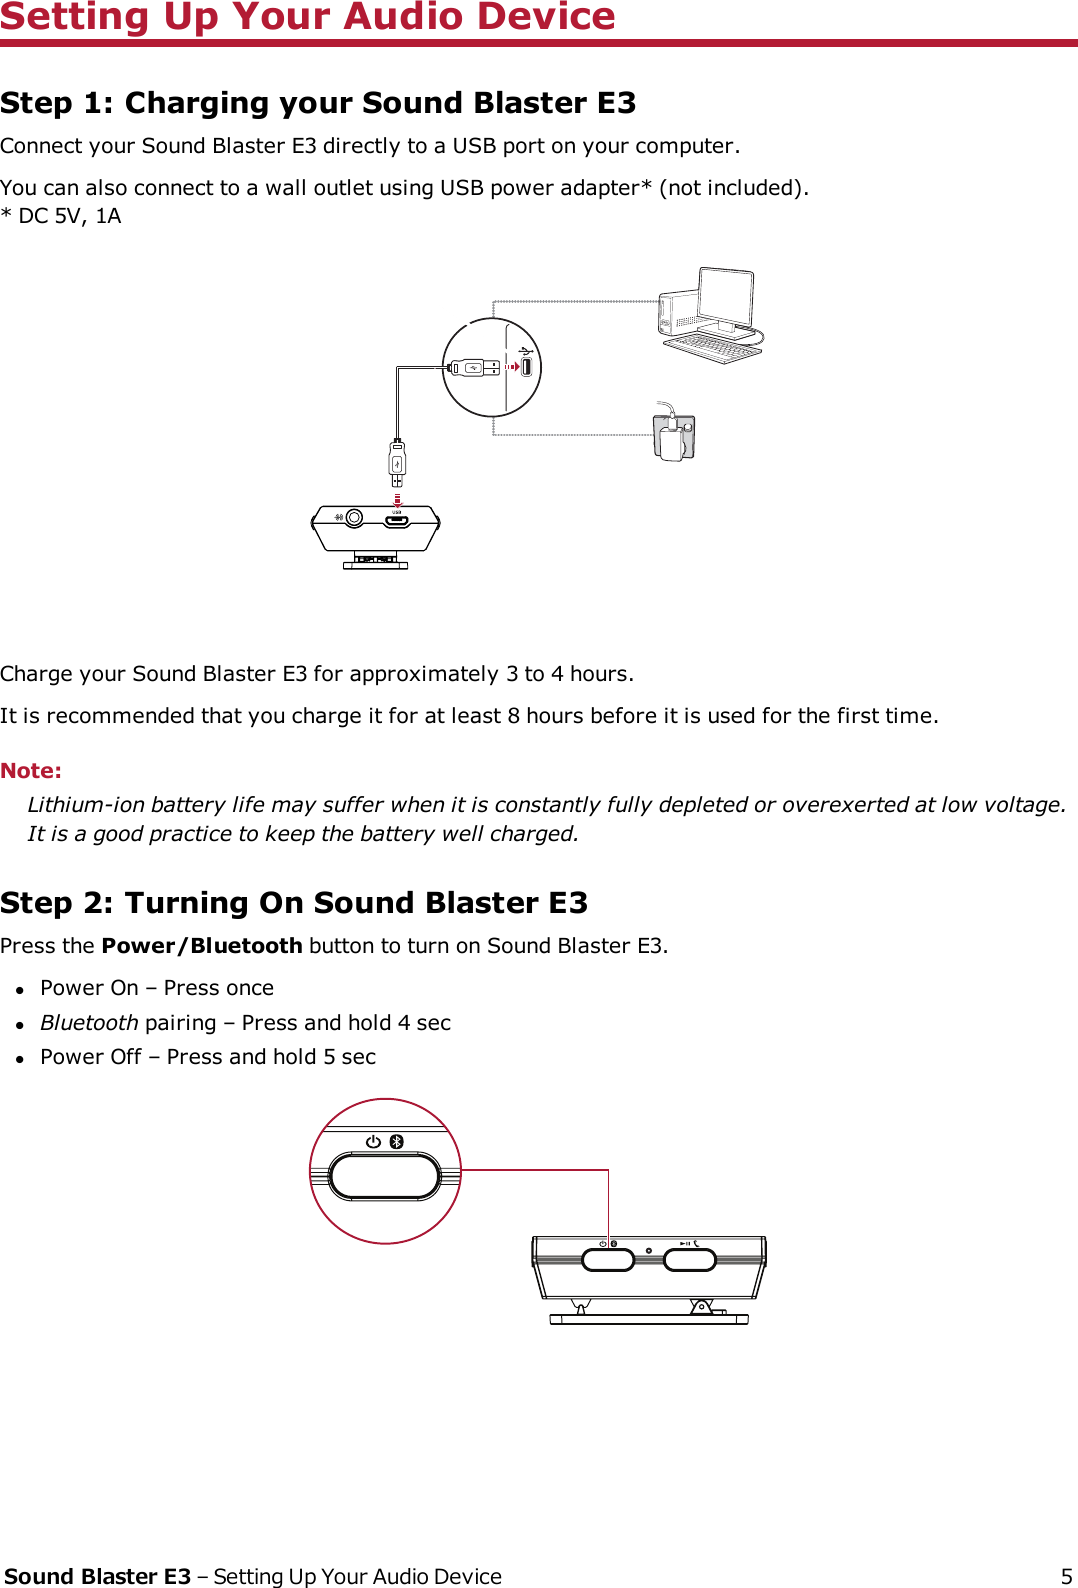 Setting Up Your Audio DeviceStep 1: Charging your Sound Blaster E3Connect your Sound Blaster E3 directly to a USB port on your computer.You can also connect to a wall outlet using USB power adapter* (not included).* DC 5V, 1A(a)(b)(c)(d)Charge your Sound Blaster E3 for approximately 3 to 4 hours.It is recommended that you charge it for at least 8 hours before it is used for the first time.Note:Lithium-ion battery life may suffer when it is constantly fully depleted or overexerted at low voltage.It is a good practice to keep the battery well charged.Step 2: Turning On Sound Blaster E3Press the Power/Bluetooth button to turn on Sound Blaster E3.lPower On – Press oncelBluetooth pairing – Press and hold 4 seclPower Off – Press and hold 5 secSound Blaster E3 – Setting Up Your Audio Device 5